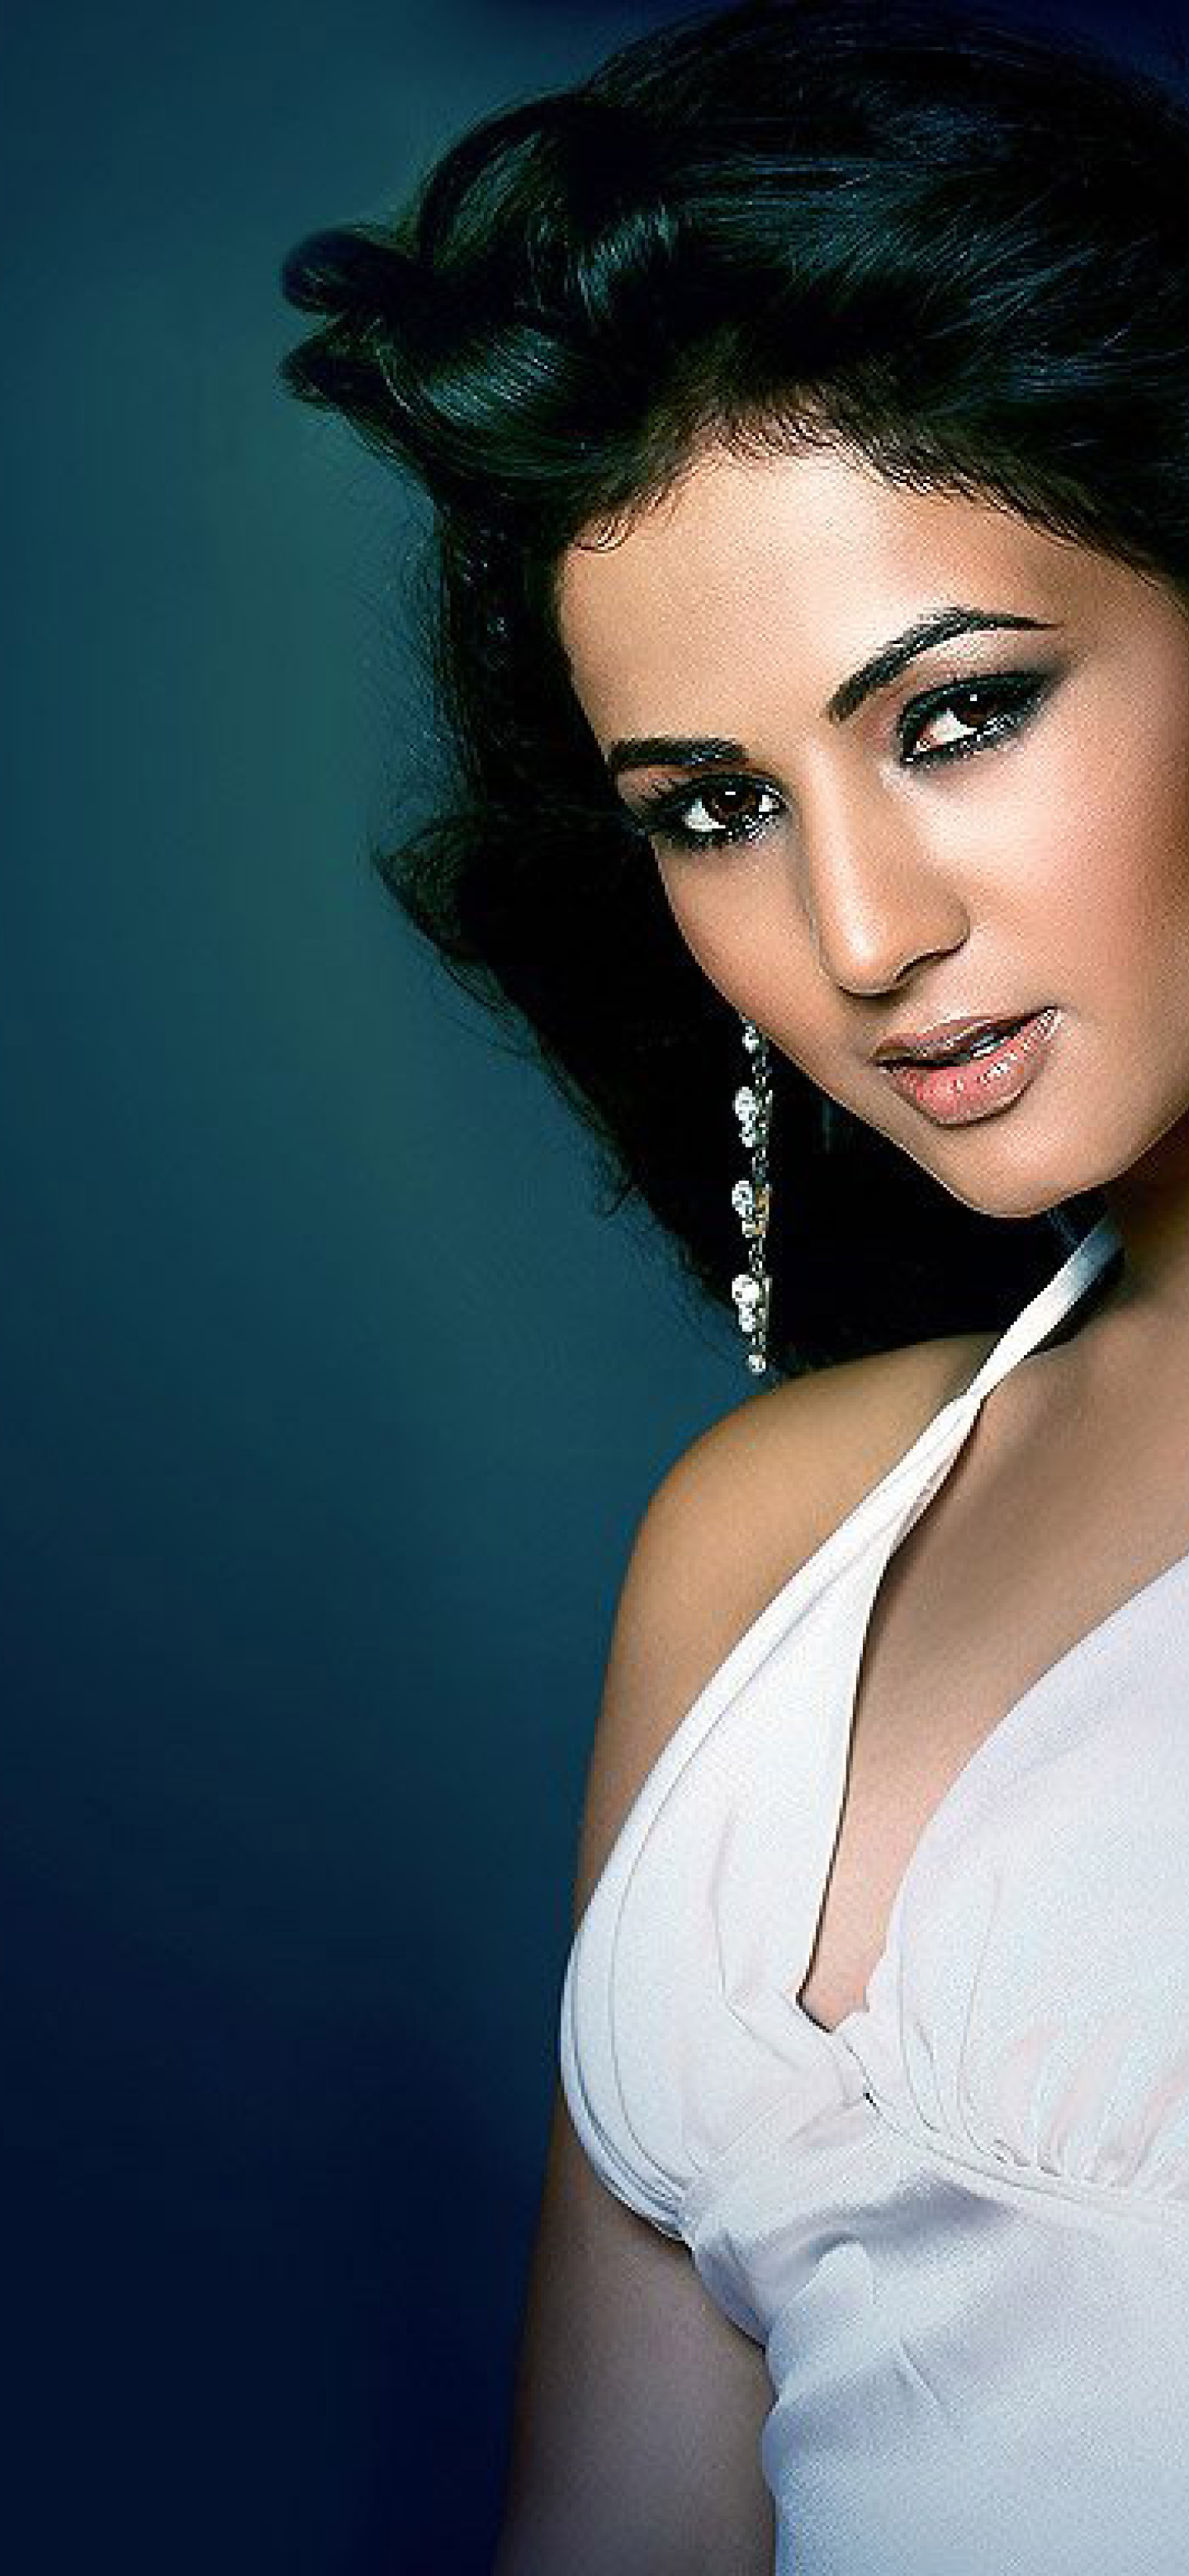 1440x3120 Sonal Chauhan Sexy Photos 1440x3120 Resolution Wallpaper, HD  Indian Celebrities 4K Wallpapers, Images, Photos and Background - Wallpapers  Den